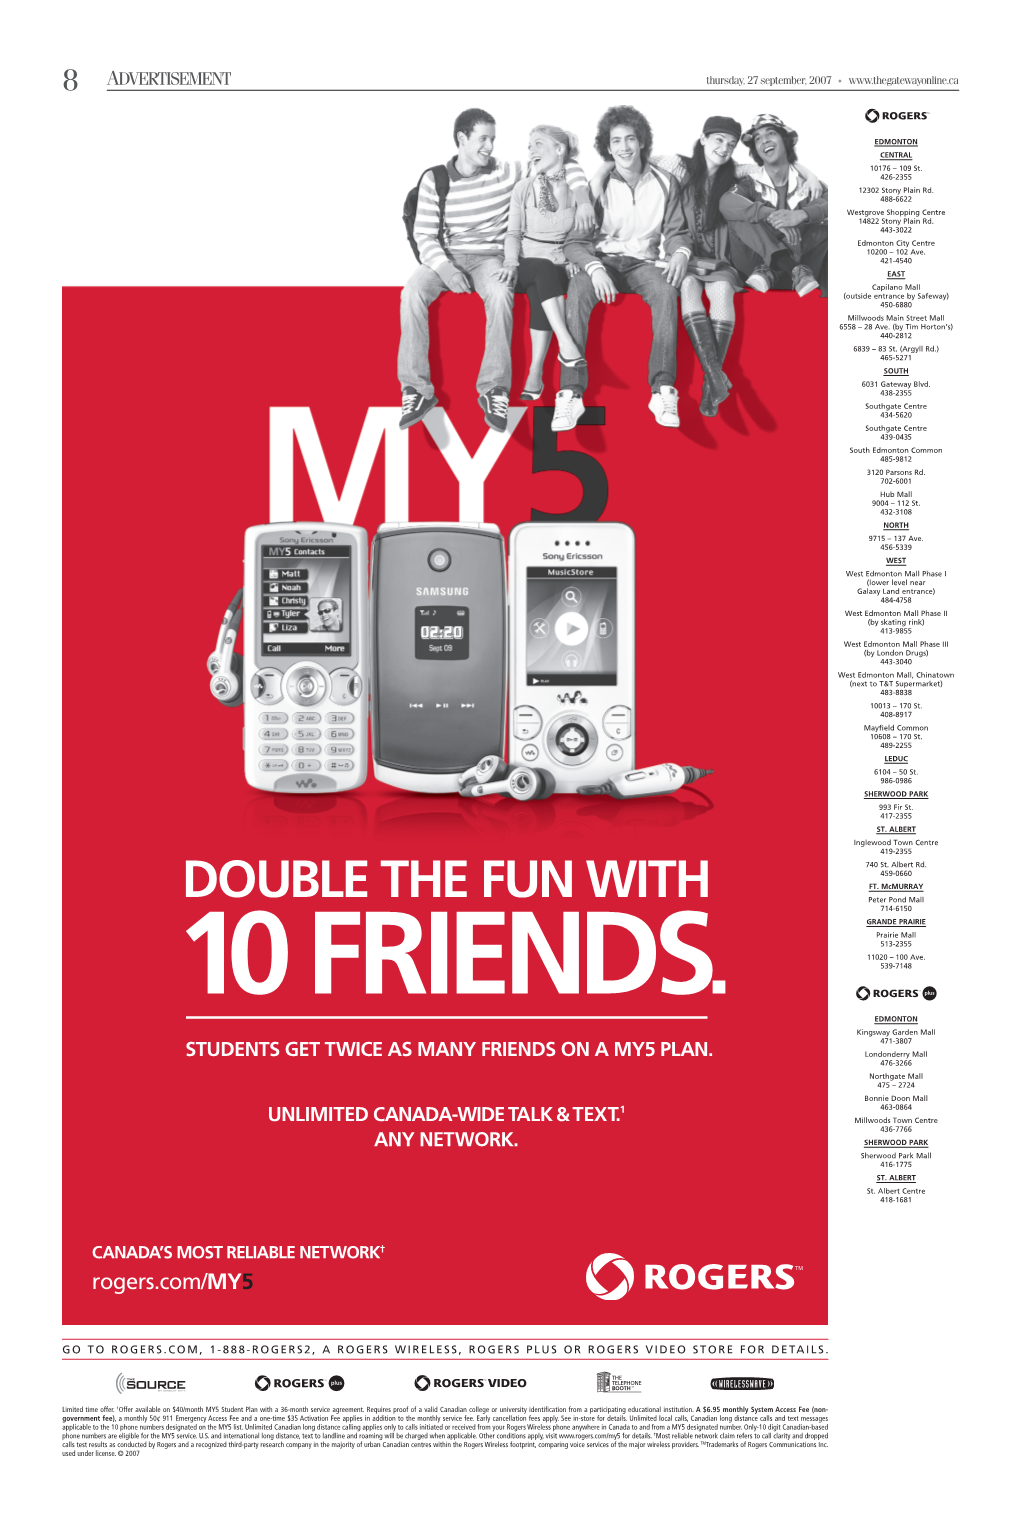 DOUBLE the FUN with Peter Pond Mall 714-6150 GRANDE PRAIRIE Prairie Mall 513-2355 11020 – 100 Ave